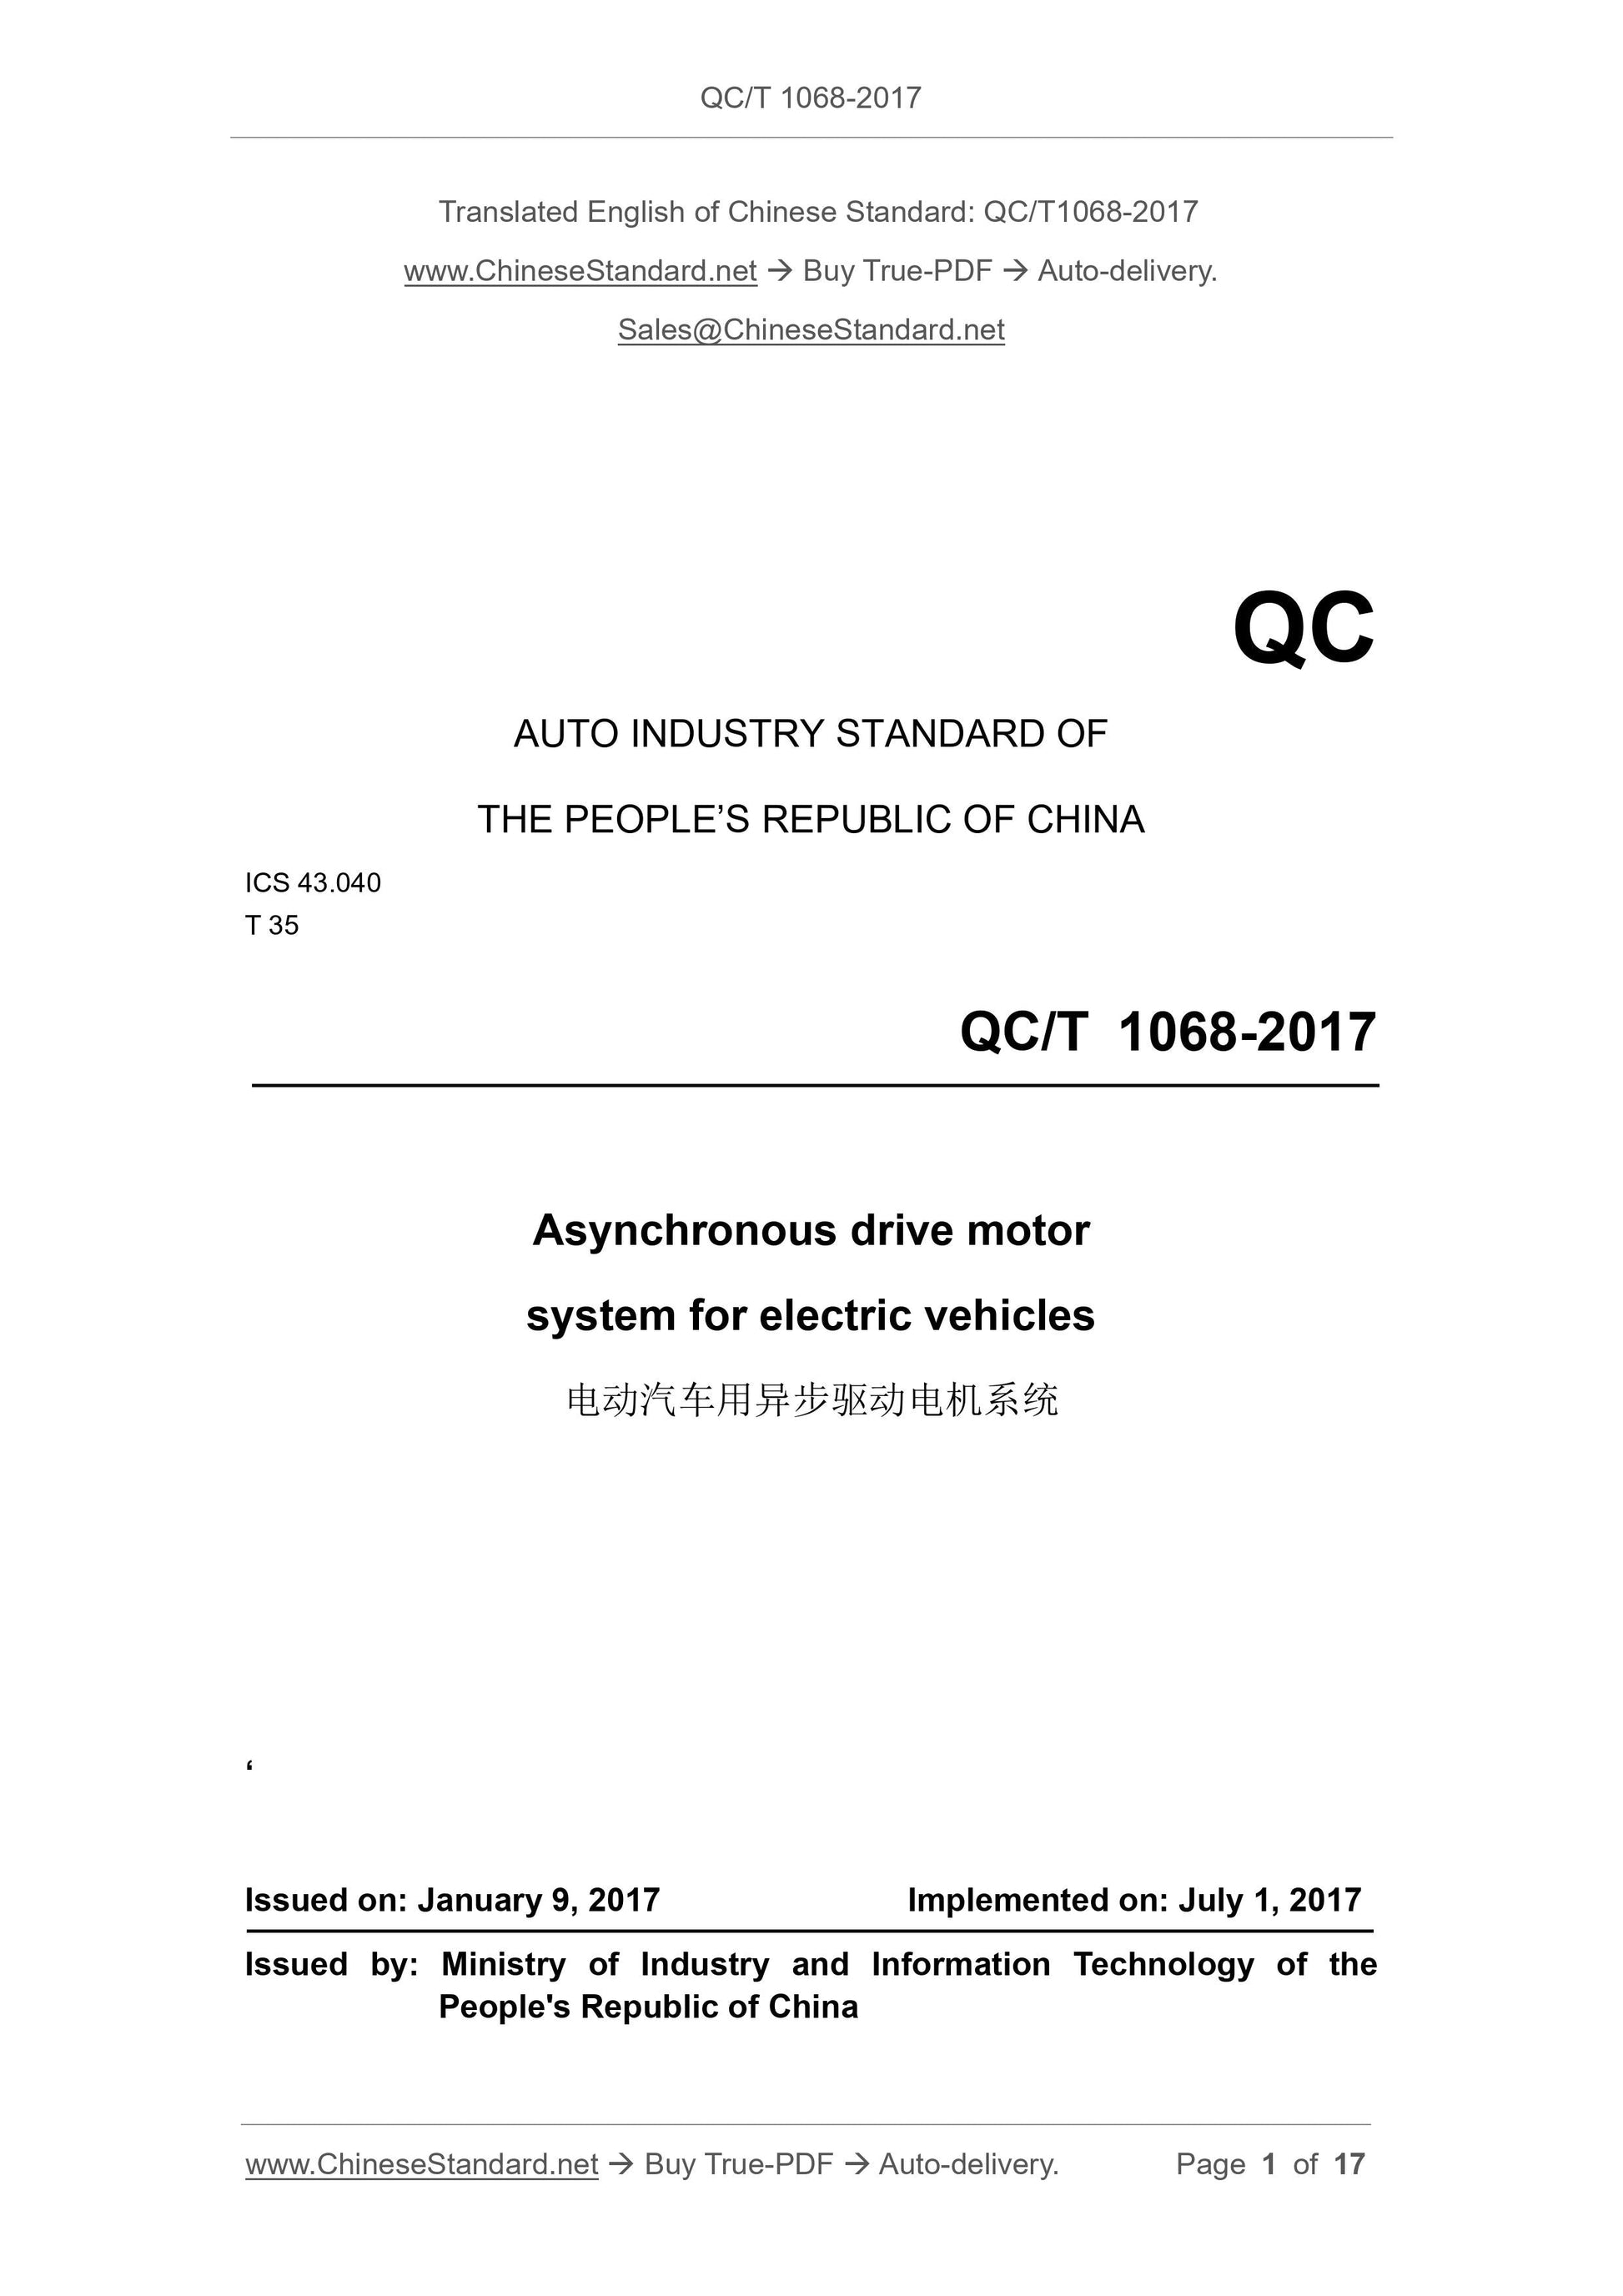 QC/T 1068-2017 Page 1